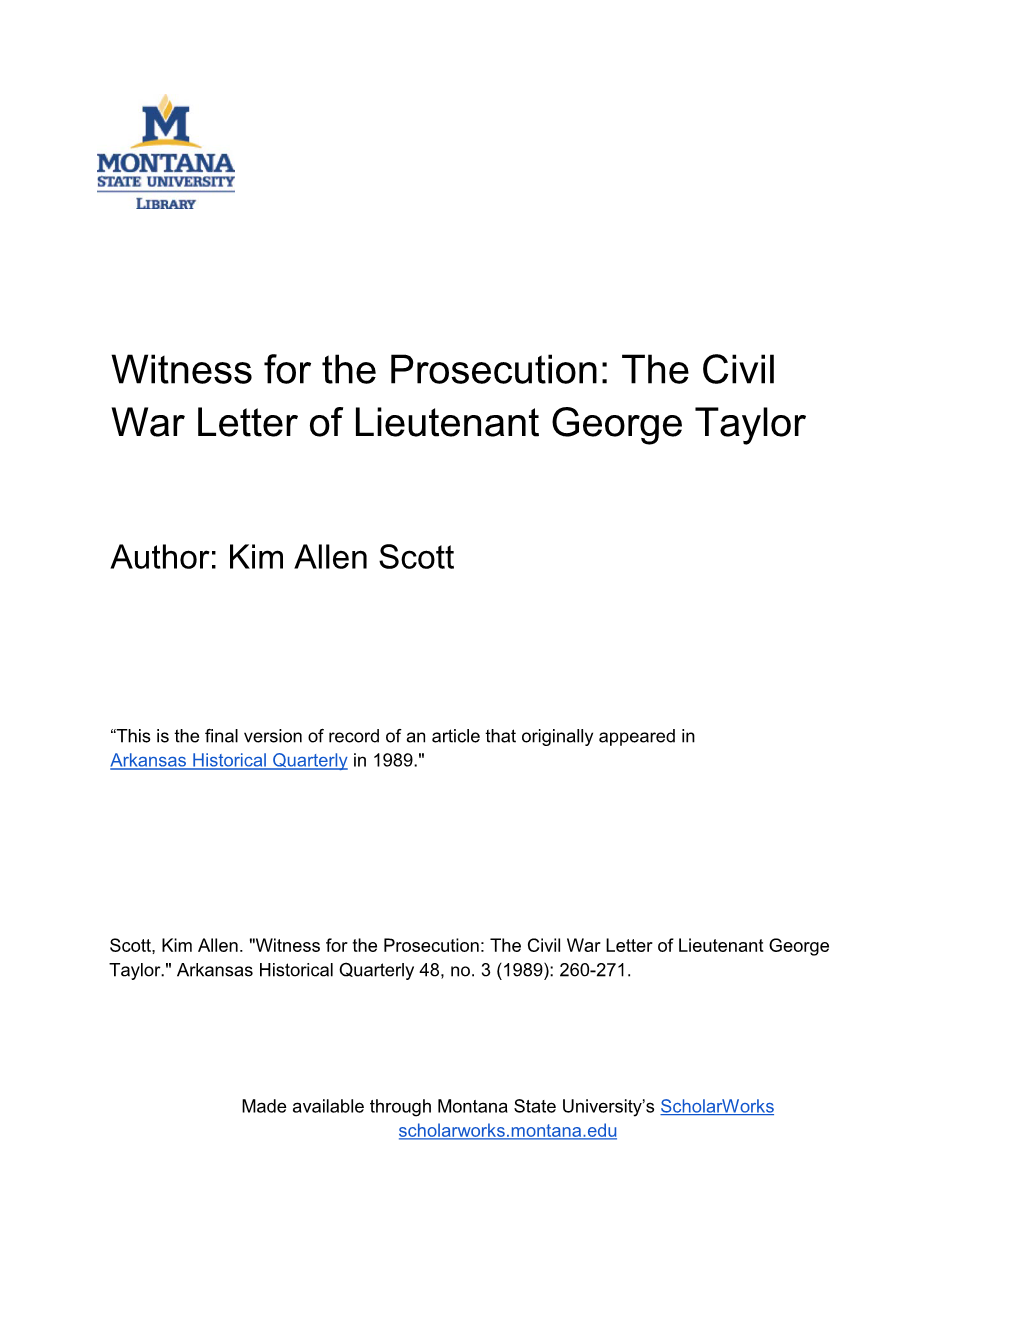 Witness for the Prosecution: the Civil War Letter of Lieutenant George Taylor